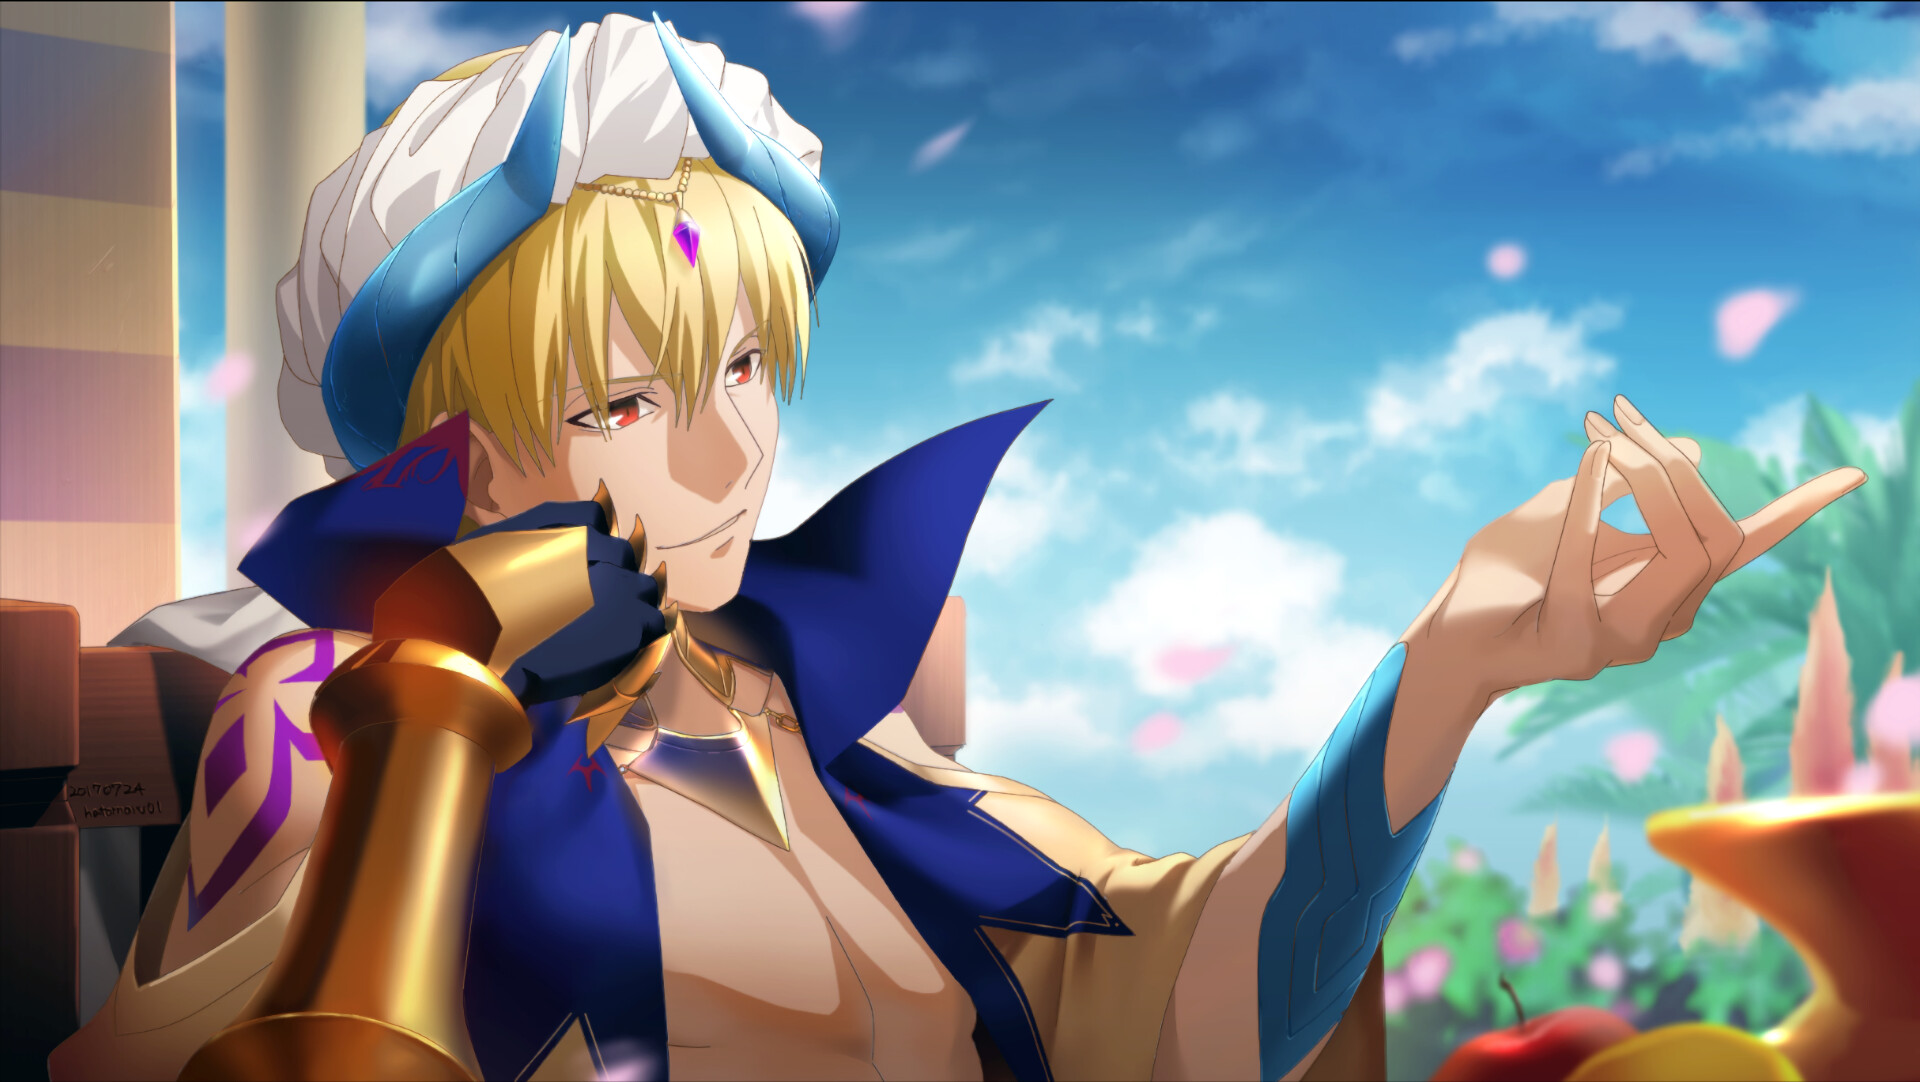 Gilgamesh (Fate/Zero): Archer, The famous Babylonian King said to possess all of the treasures of the world. 1920x1090 HD Wallpaper.